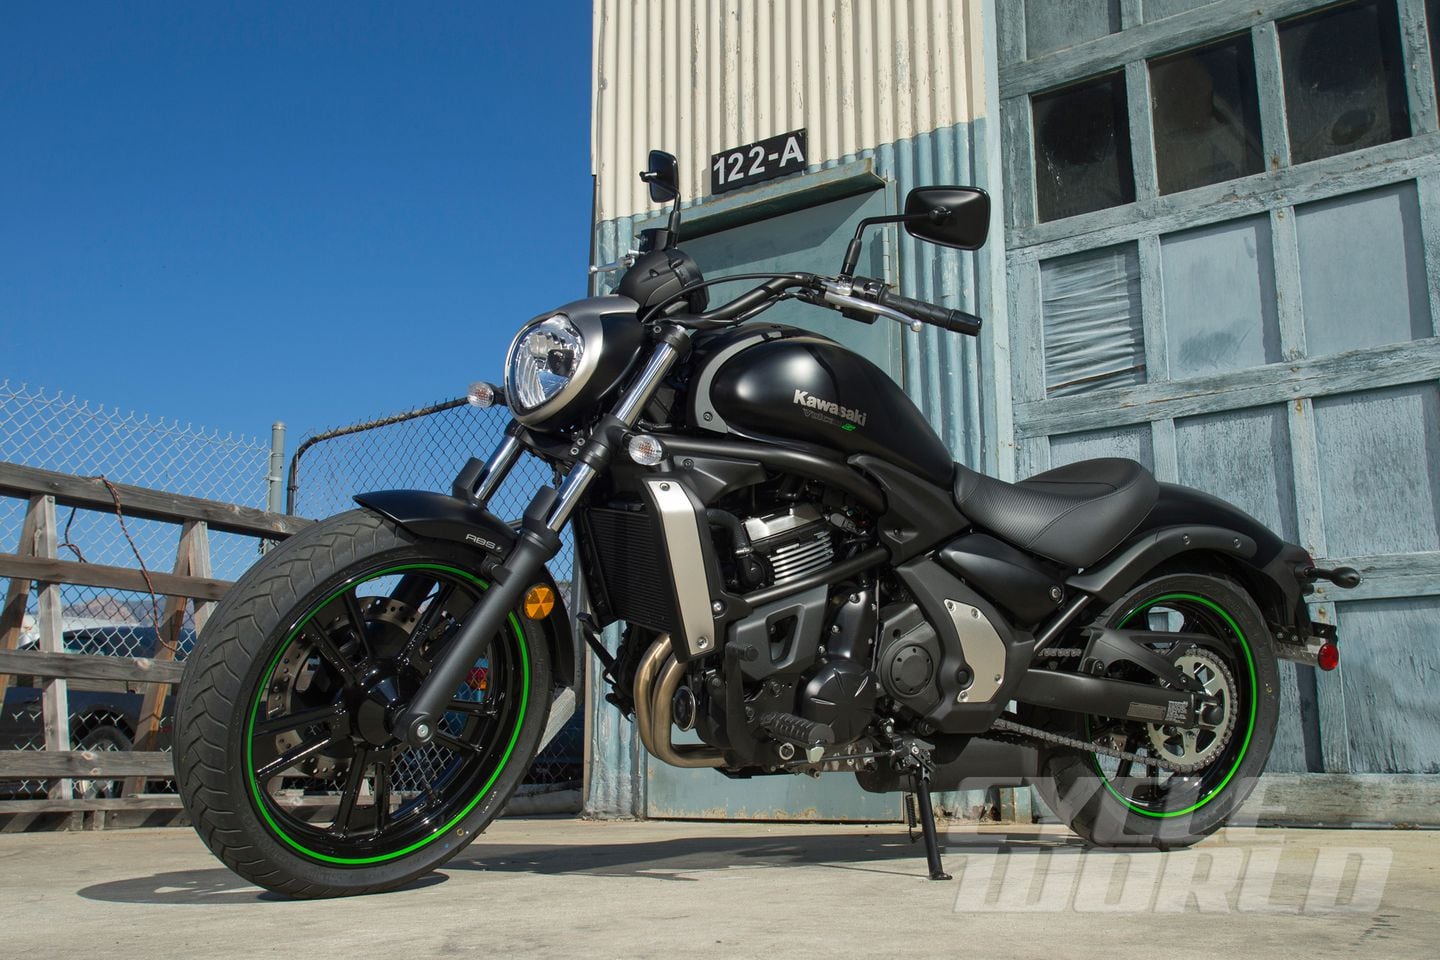 temperament bh Ulydighed 2015 Kawasaki Vulcan S First Ride Cruiser Motorcycle Review- Photos- Specs  | Cycle World